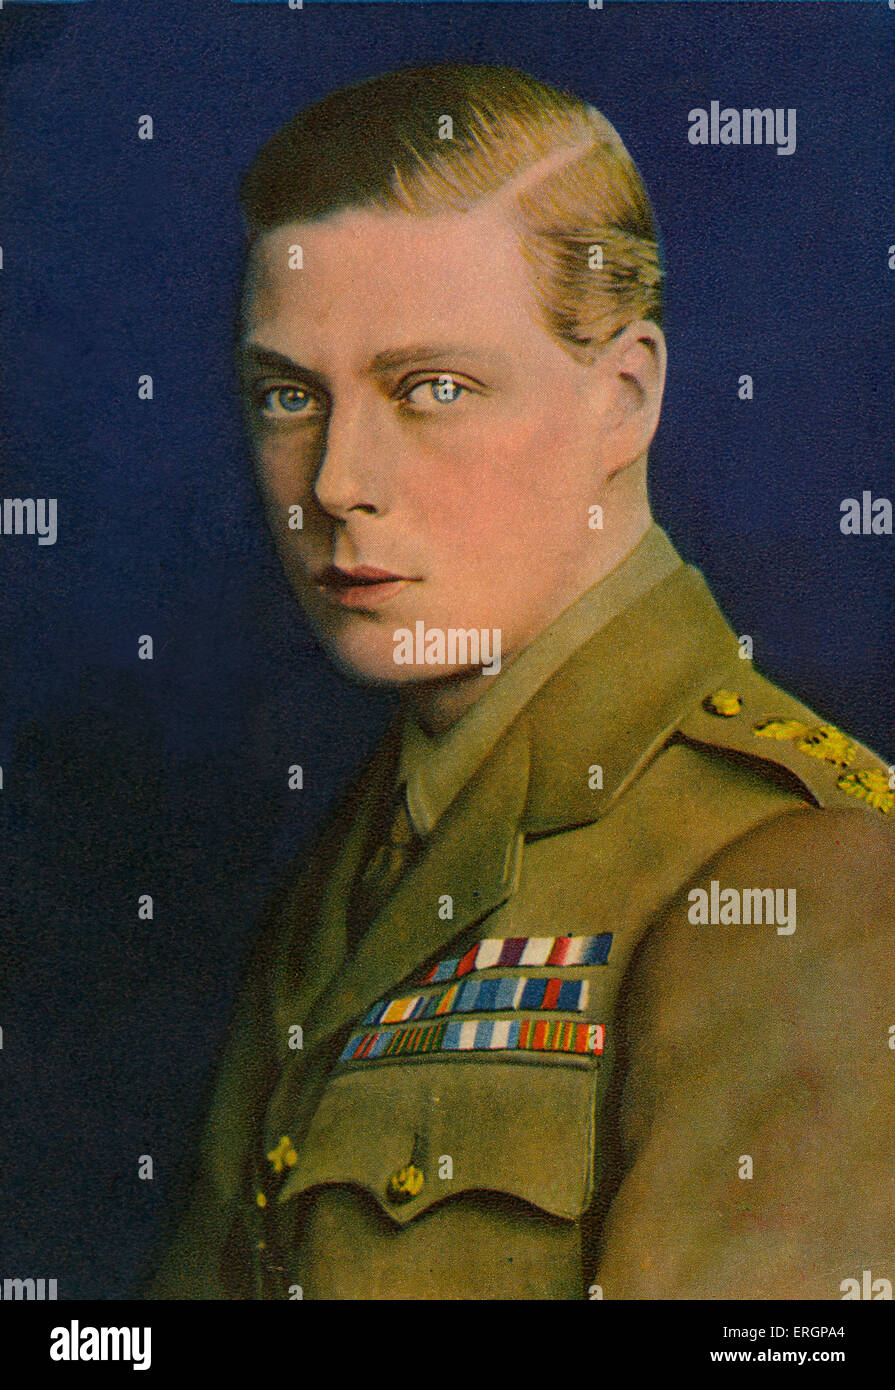 Edward VIII -  Prince of Wales, in military uniform, portrait.  King of the United Kingdom and the Dominions of the British Stock Photo